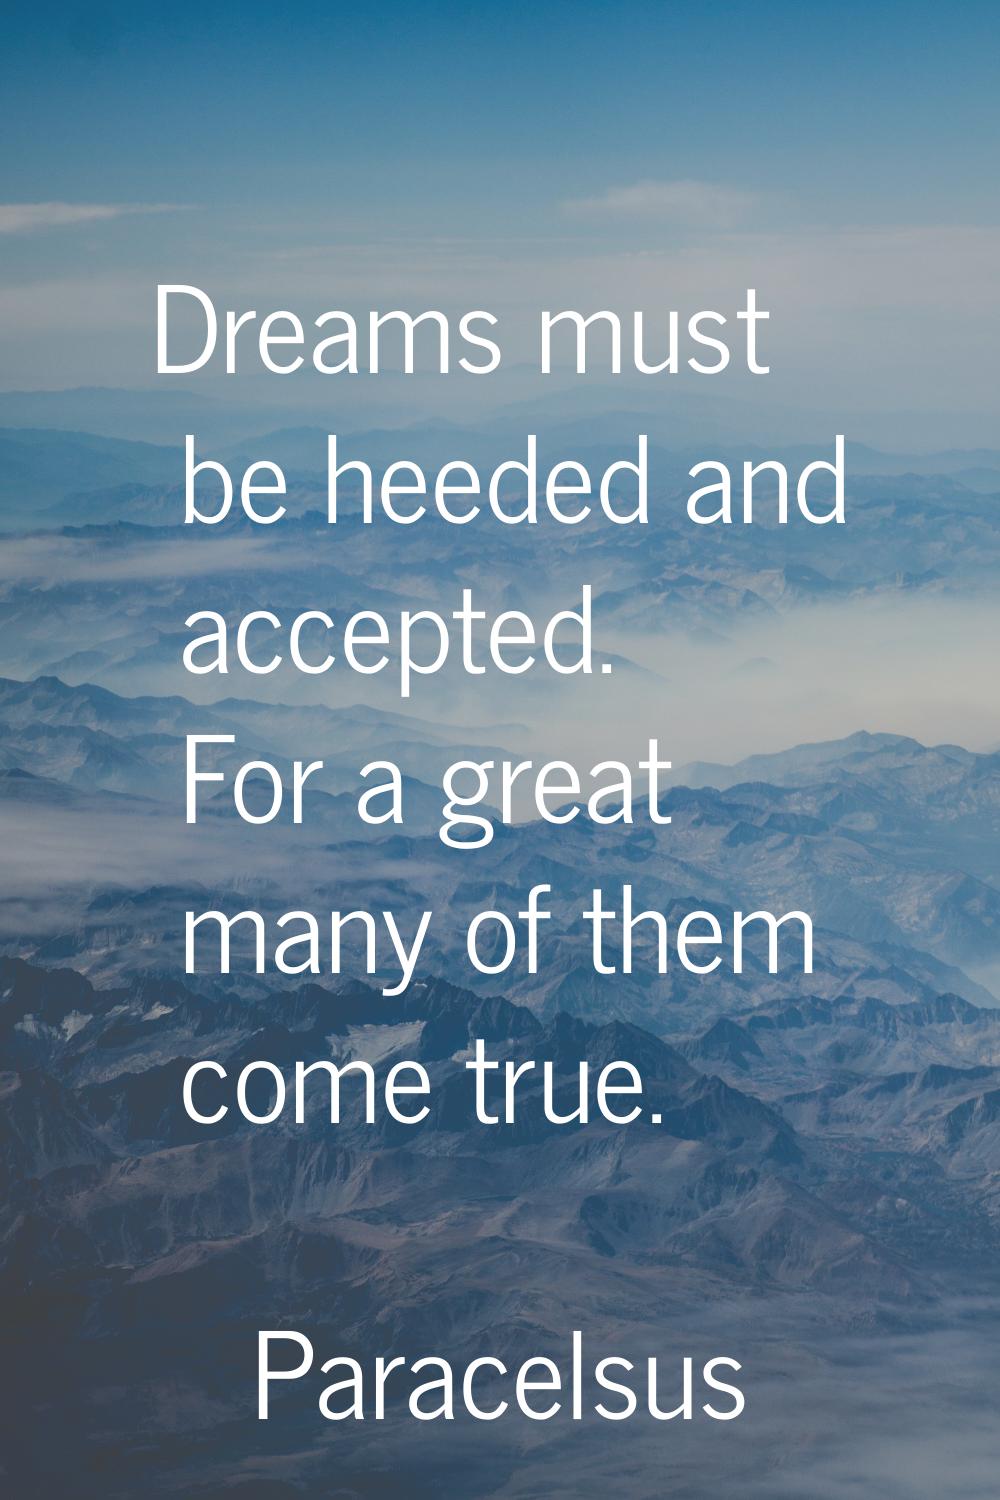 Dreams must be heeded and accepted. For a great many of them come true.